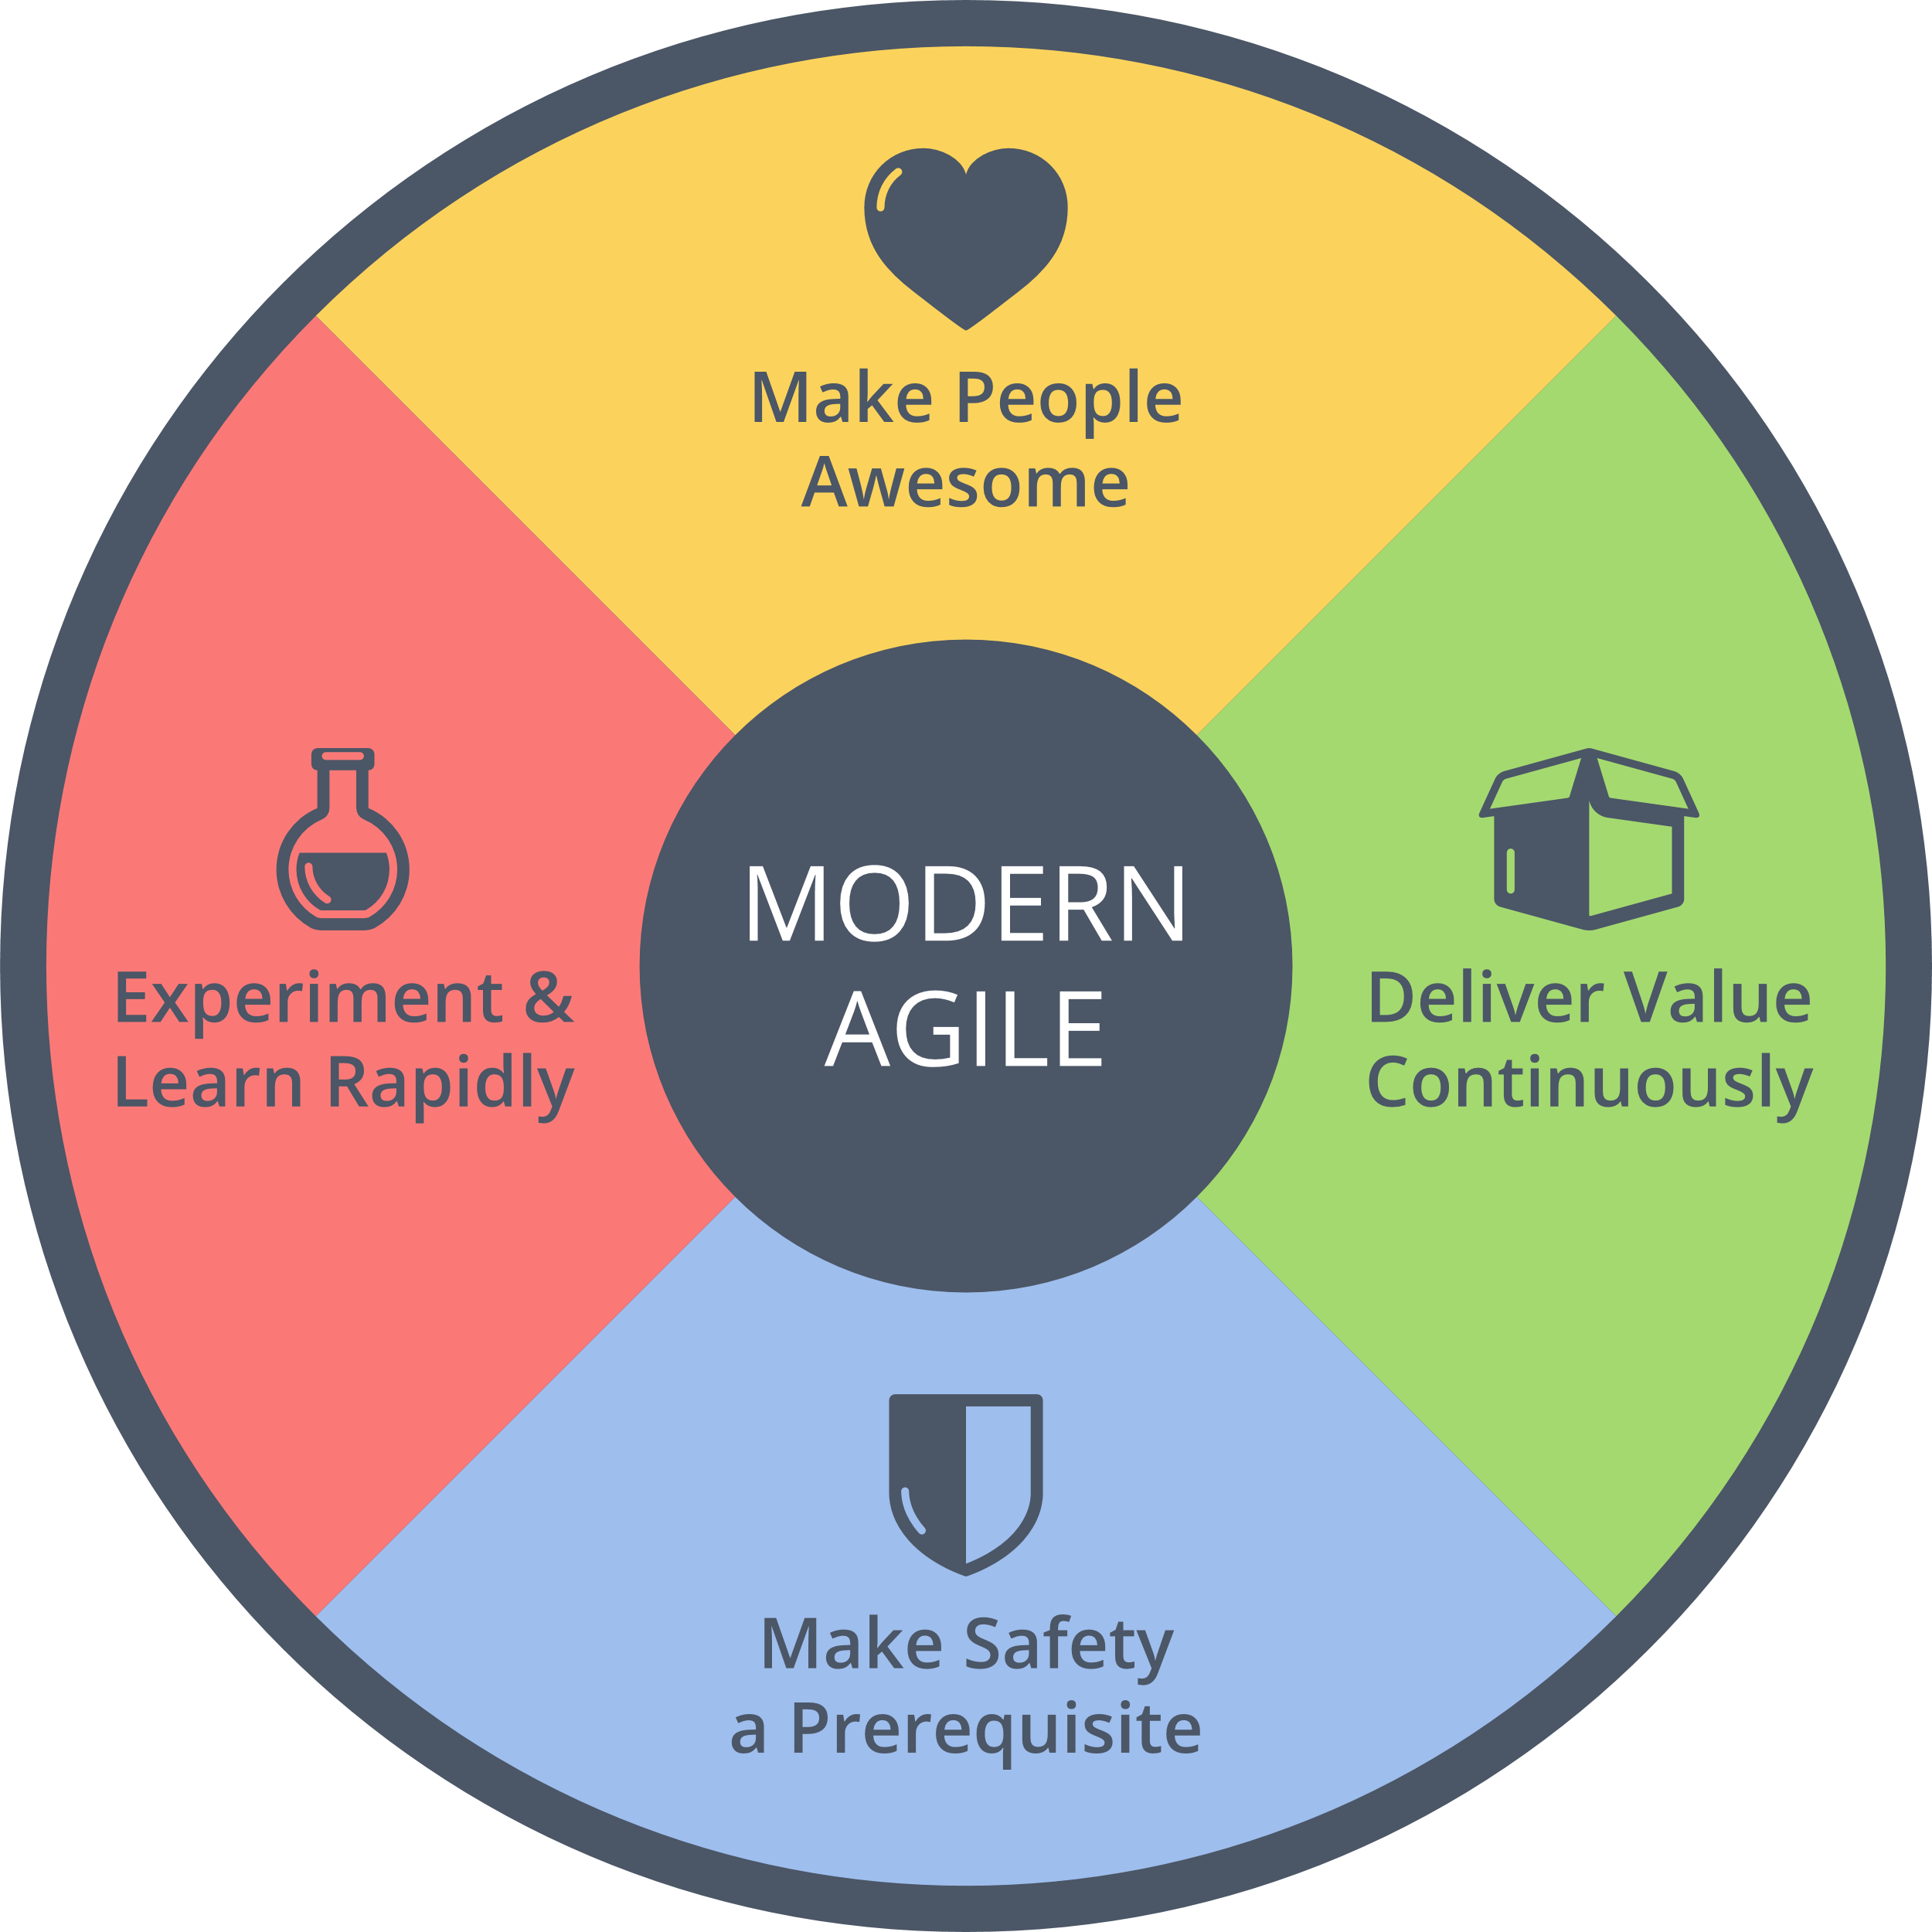 Circle diagram with "Modern Agile" in the middle and "Make Safety a Prerequisite," "Experiment and Learn Rapidly, "Deliver Value Continuously," and "Make People Awesome."